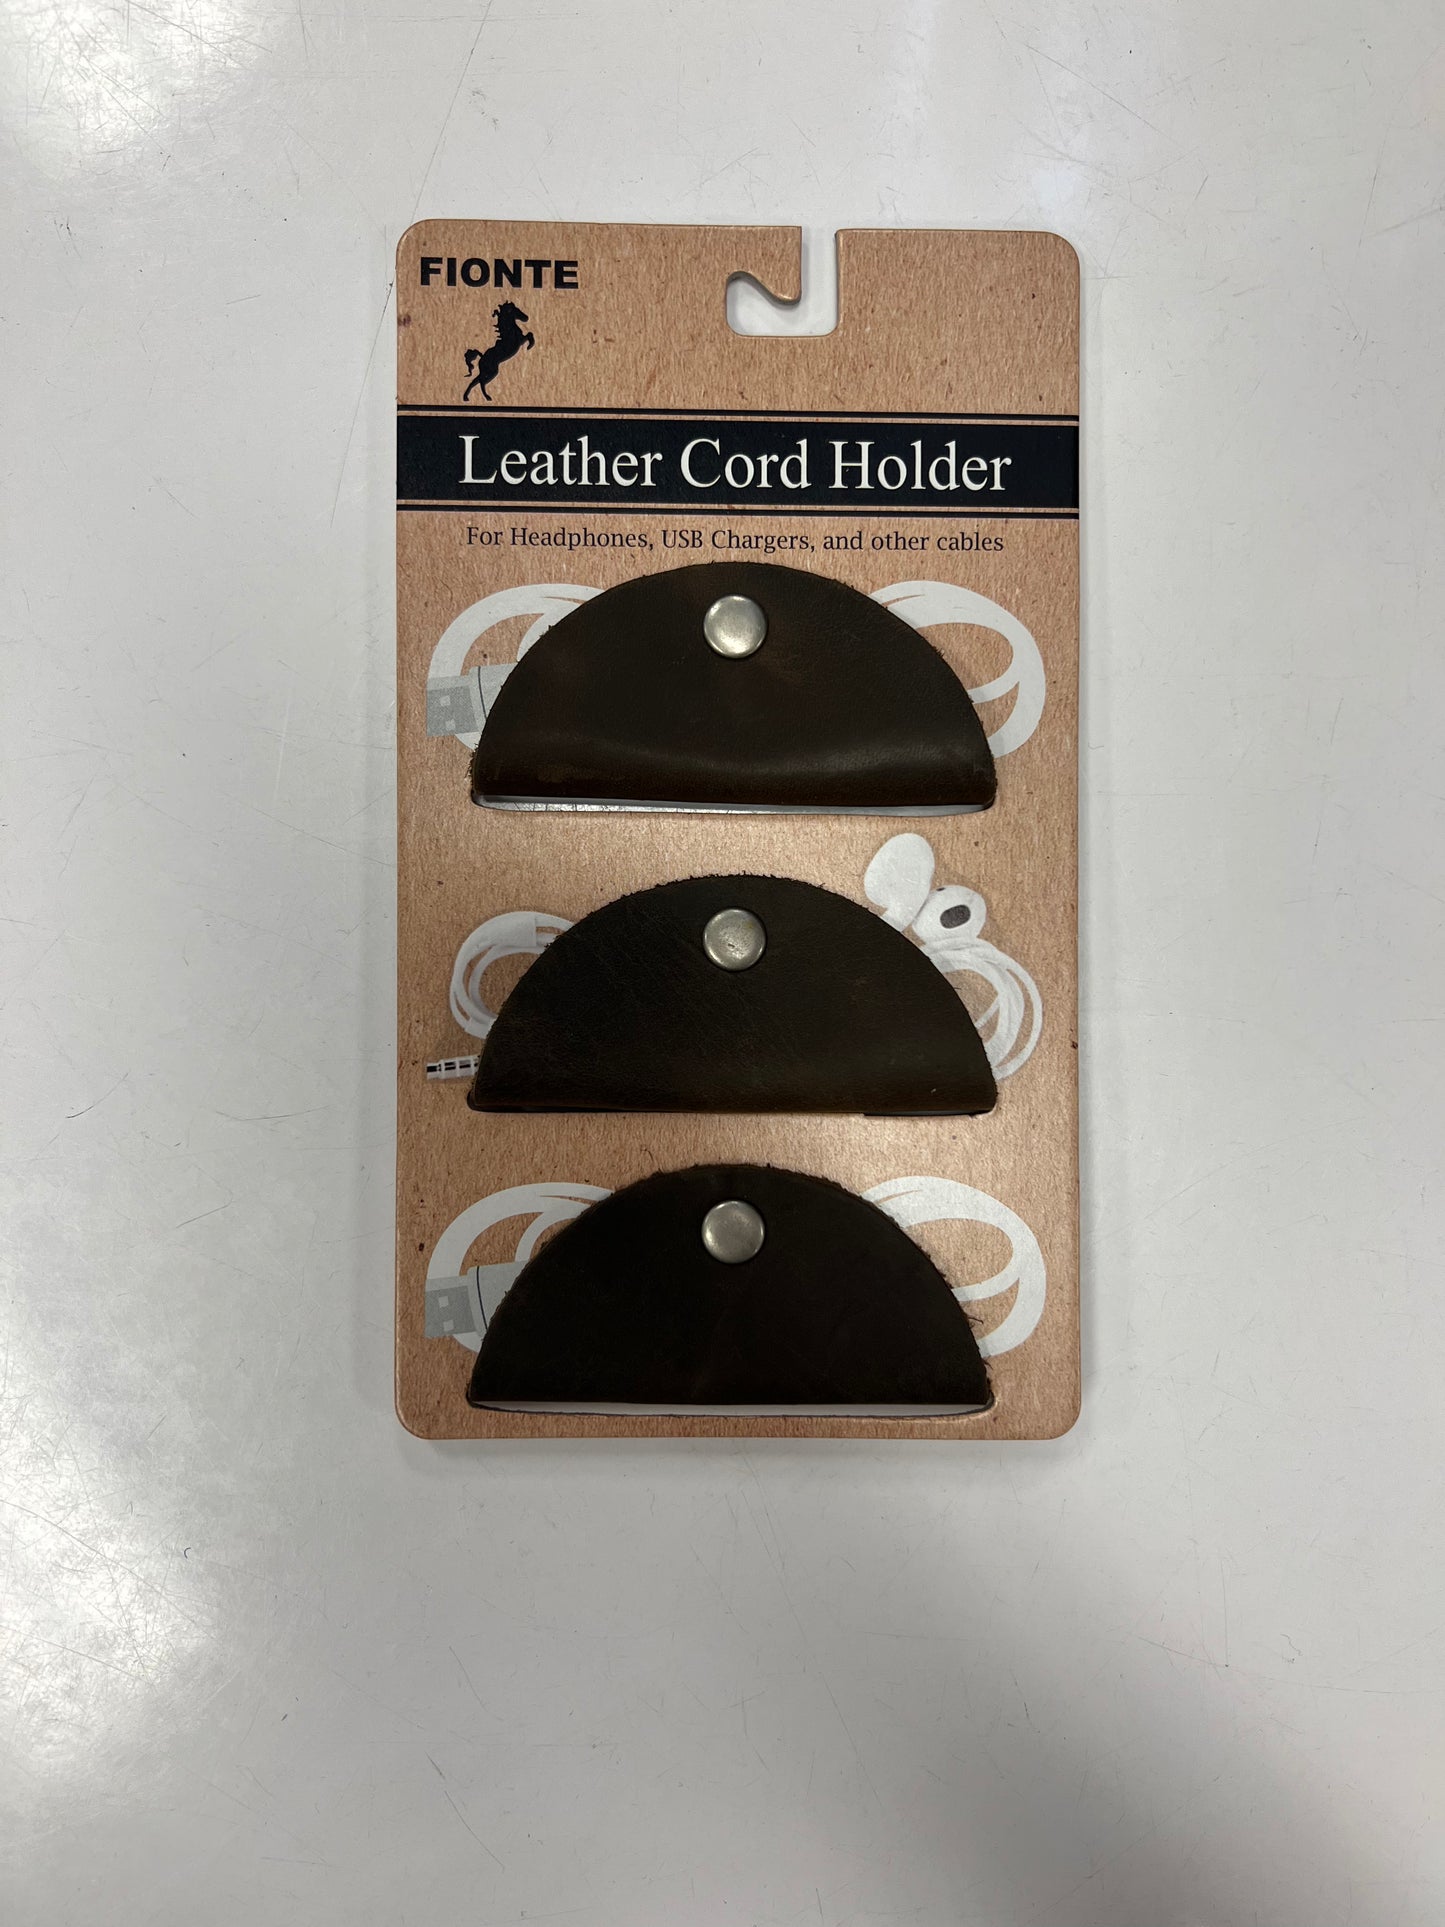 Fionte Leather Cord Holder (set of 3)